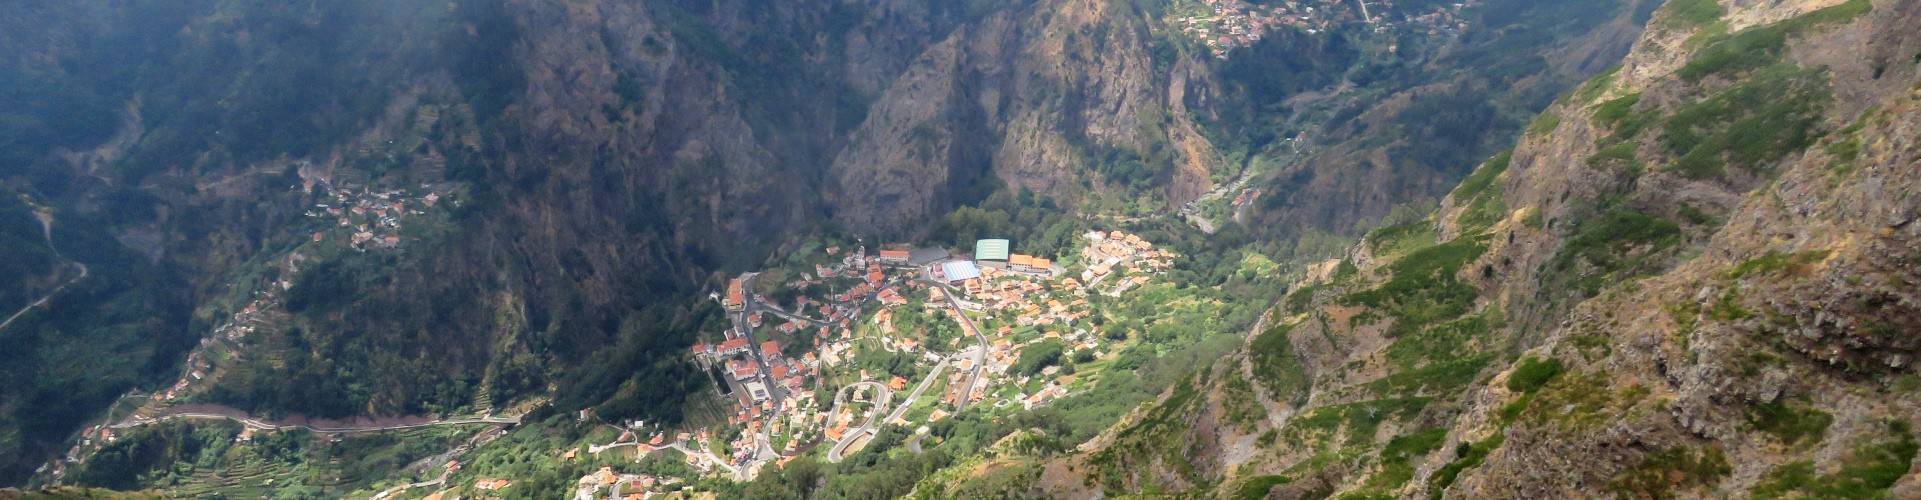 Half Day Jeep Tour - Nun's and Valleys in Madeira